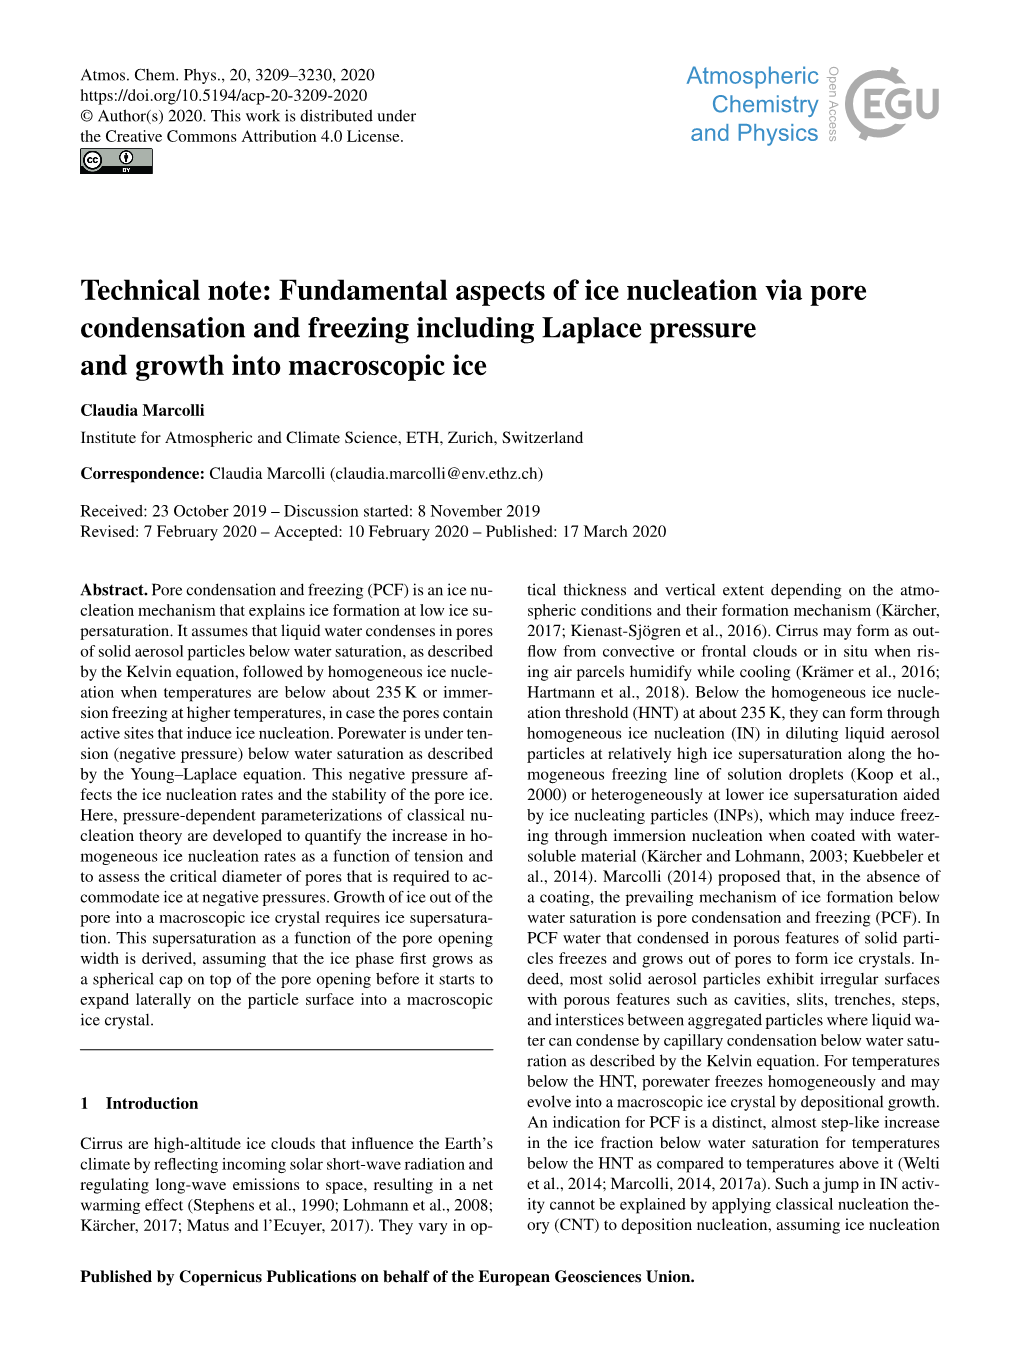 Fundamental Aspects of Ice Nucleation Via Pore Condensation and Freezing Including Laplace Pressure and Growth Into Macroscopic Ice